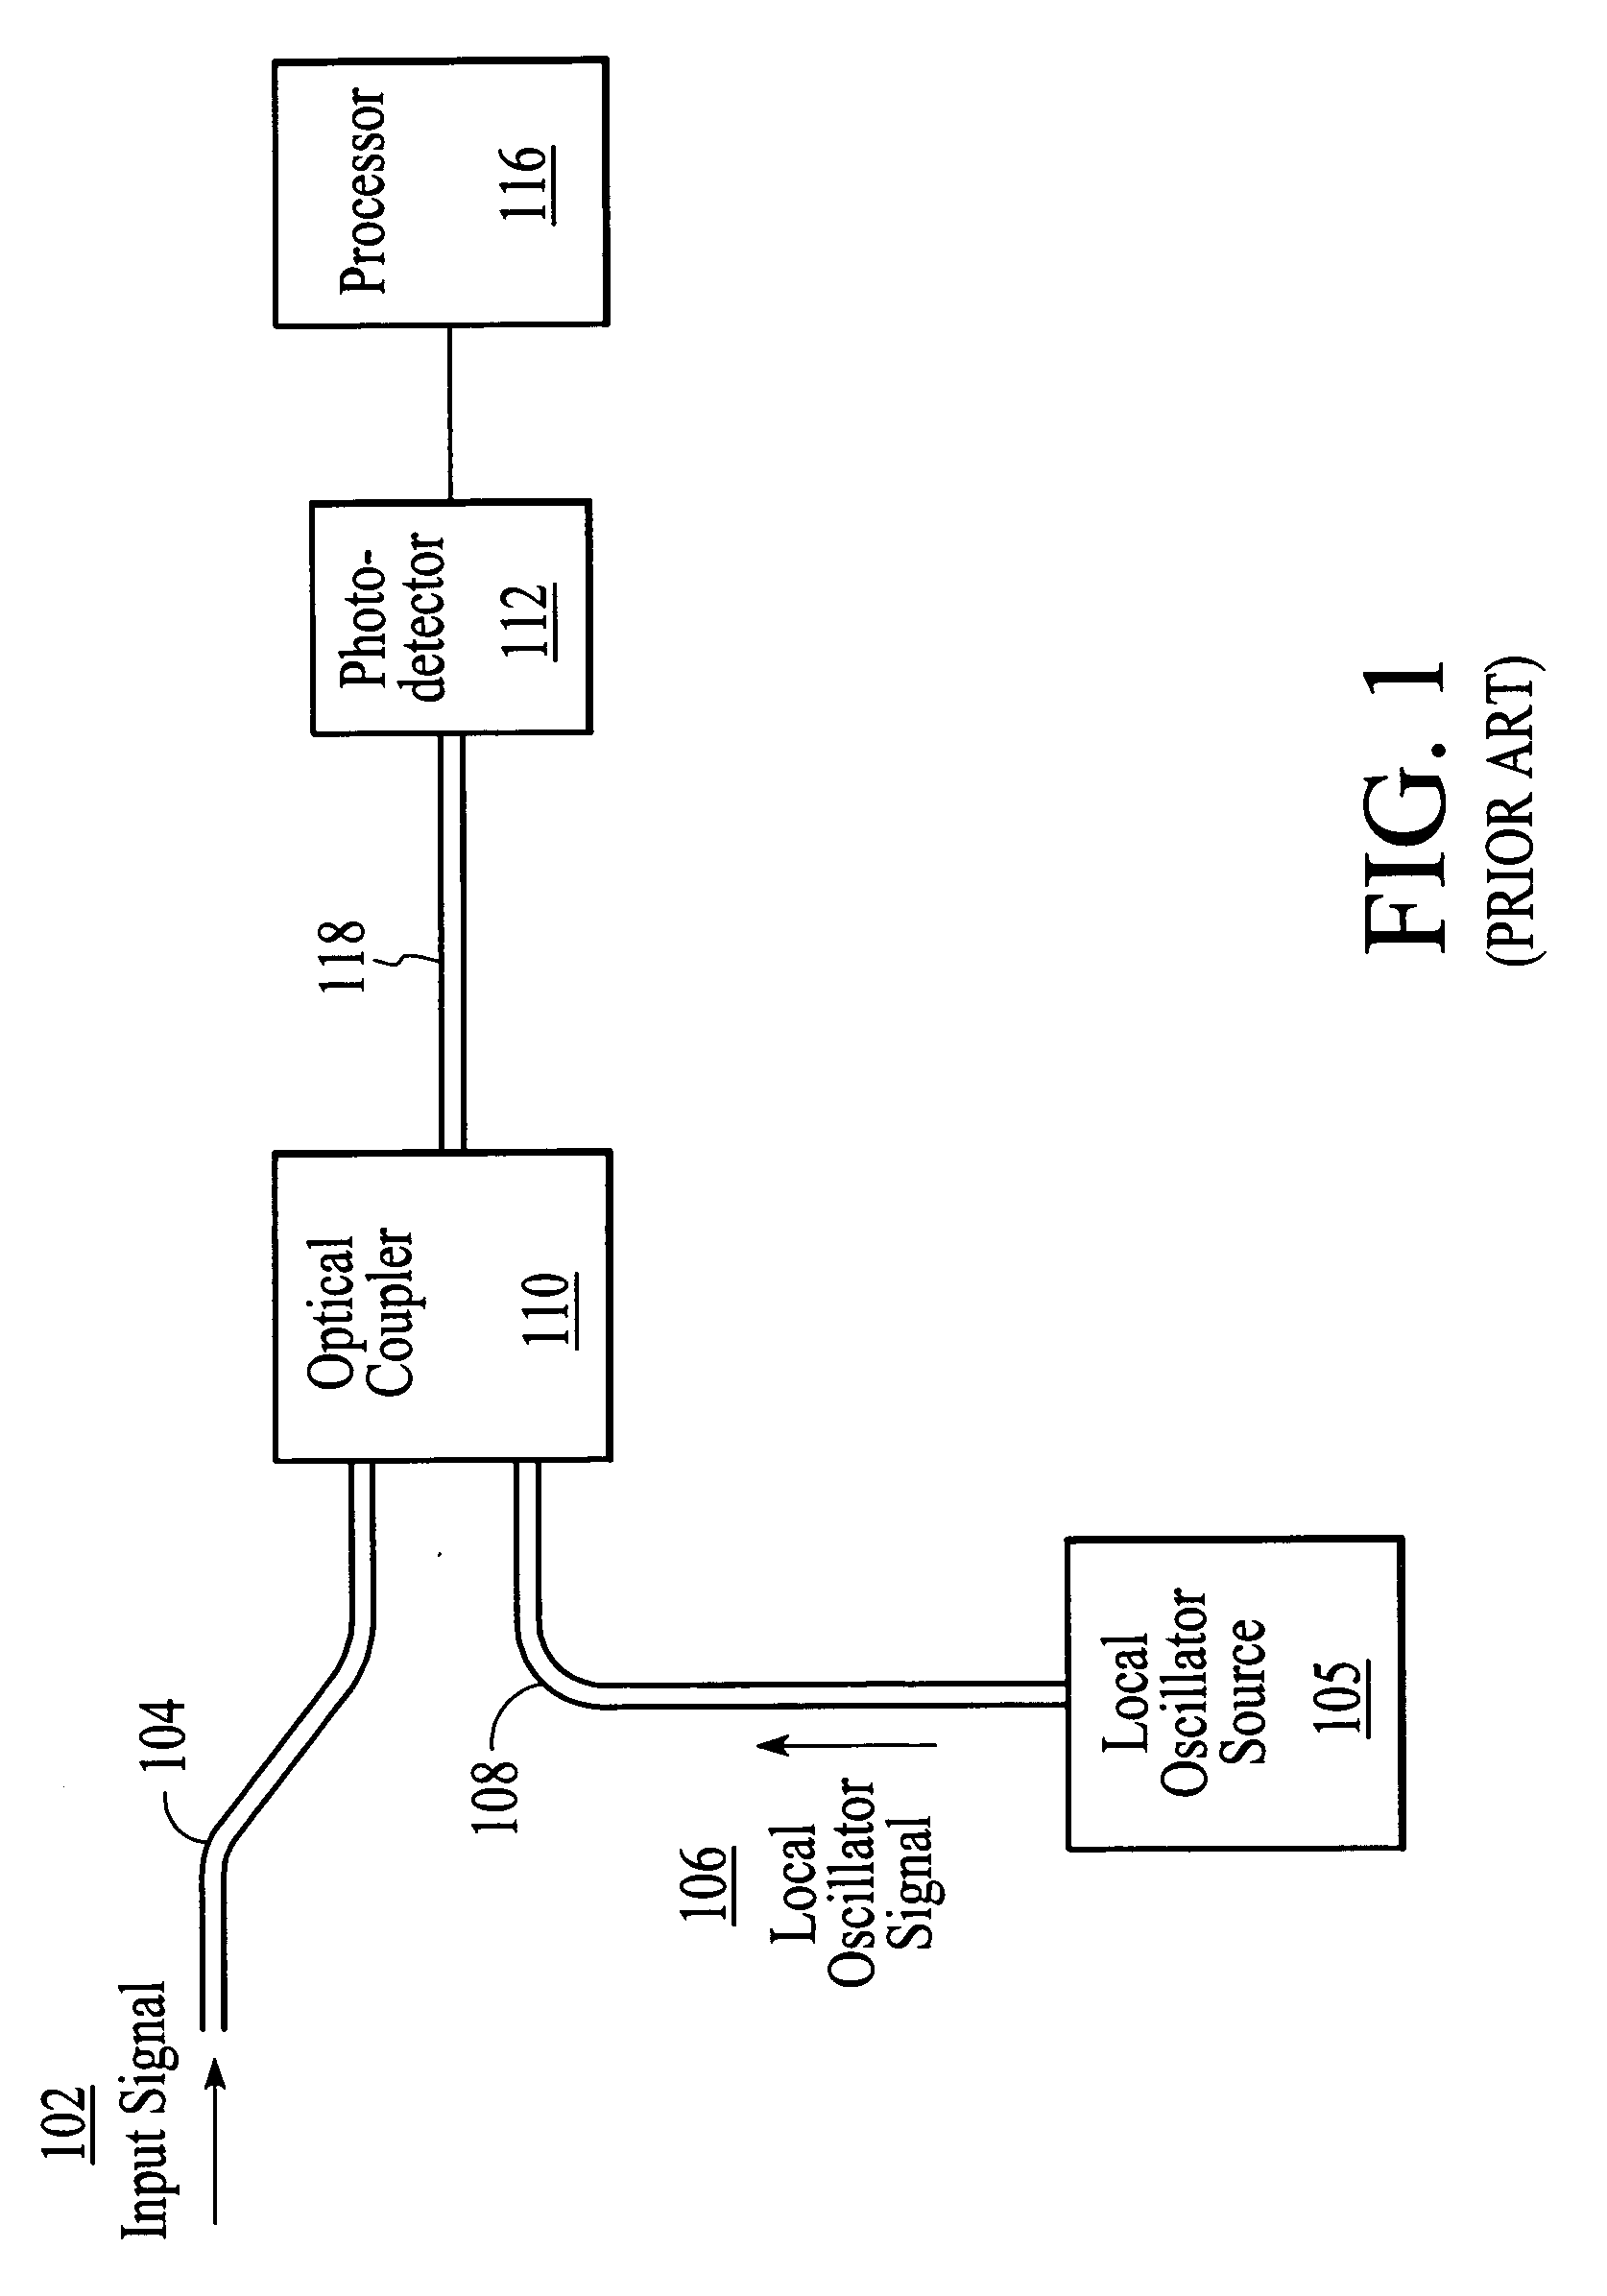 System and method for optical heterodyne detection of an optical signal including optical pre-selection that is adjusted to accurately track a local oscillator signal